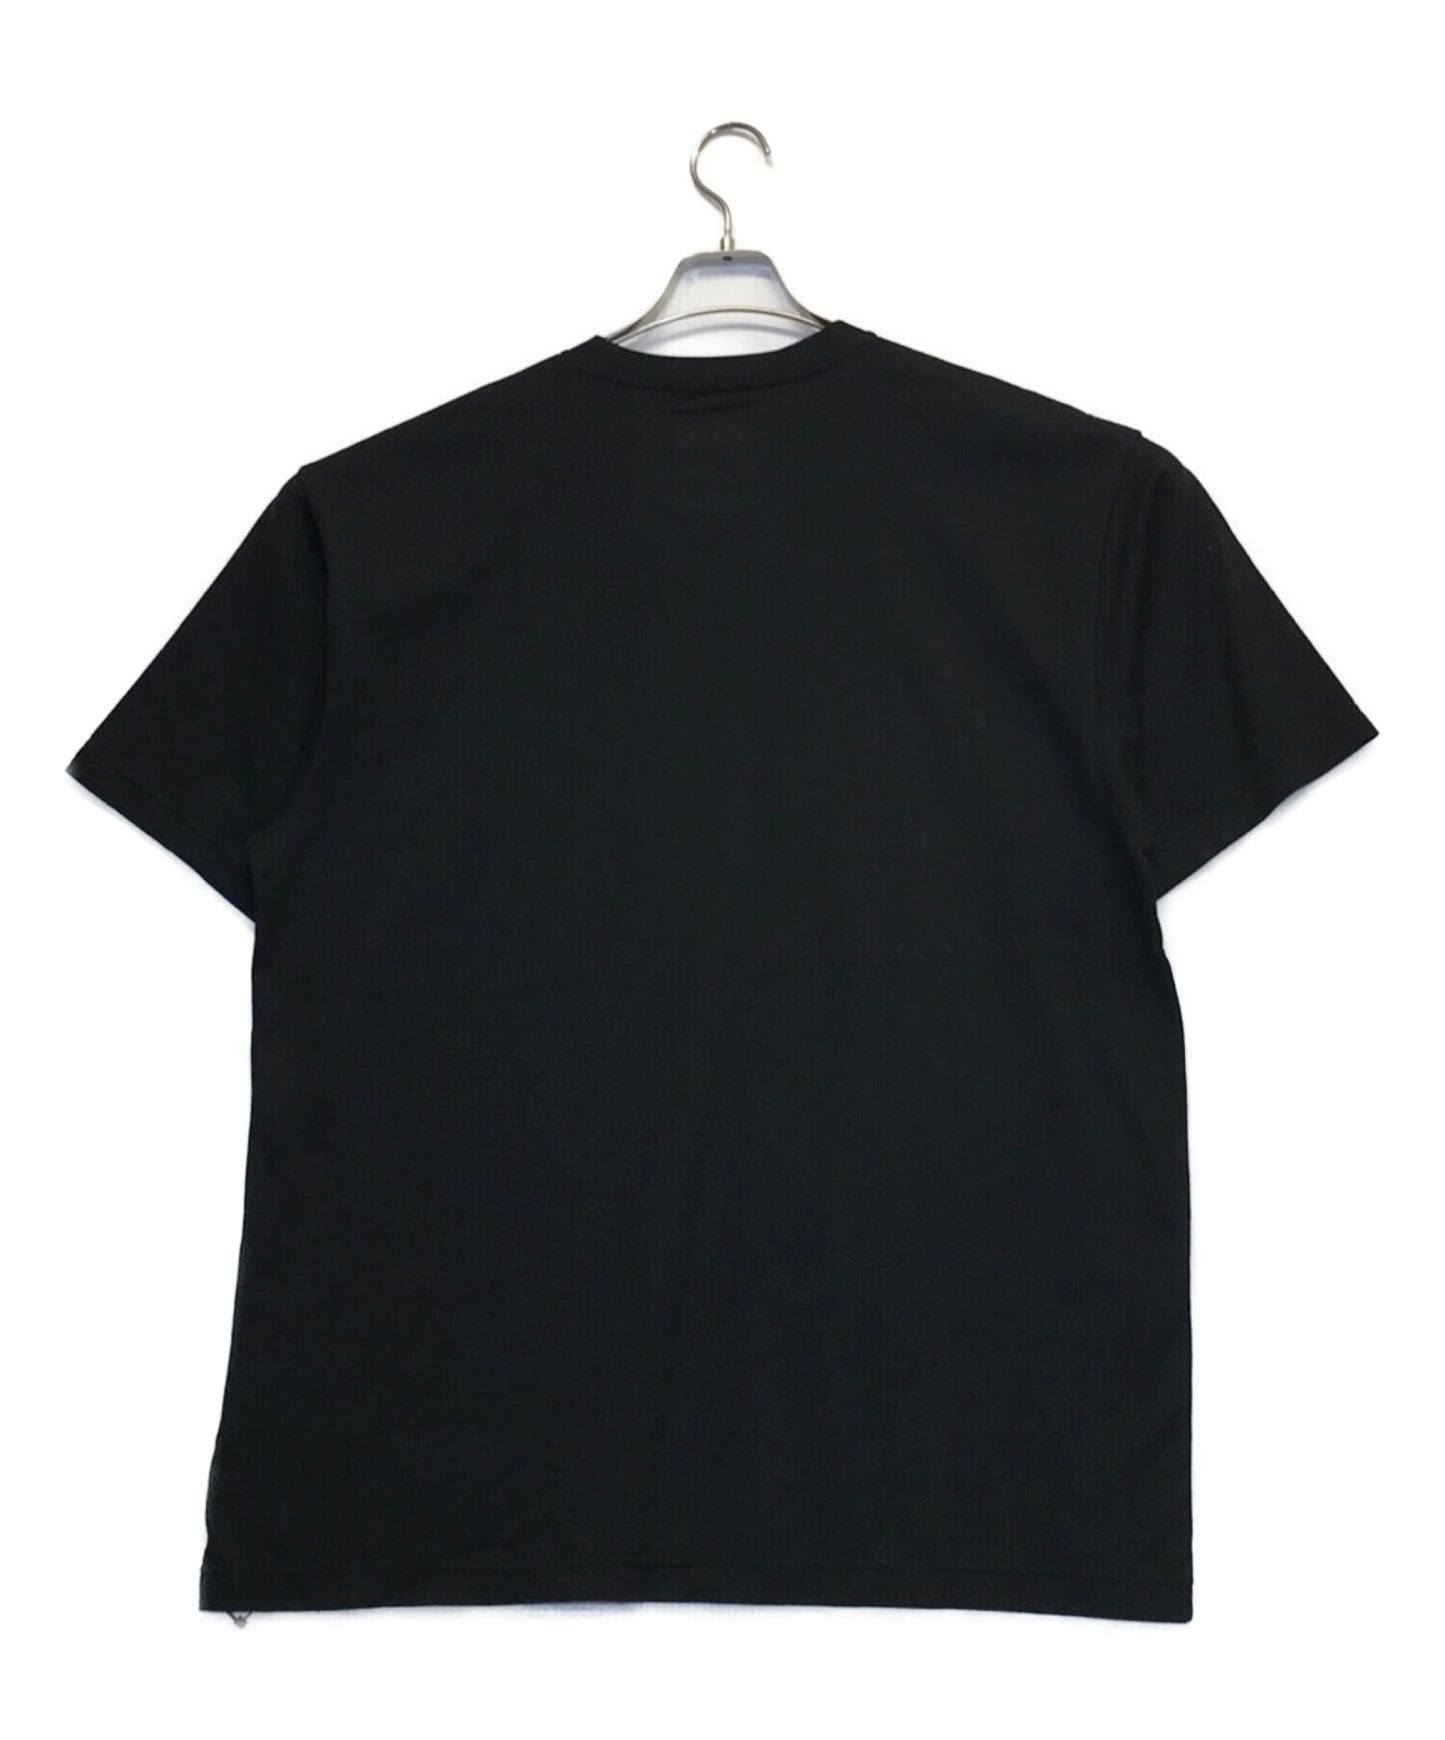 Undercover One on One Collaboration T-Shirt UC2B9801